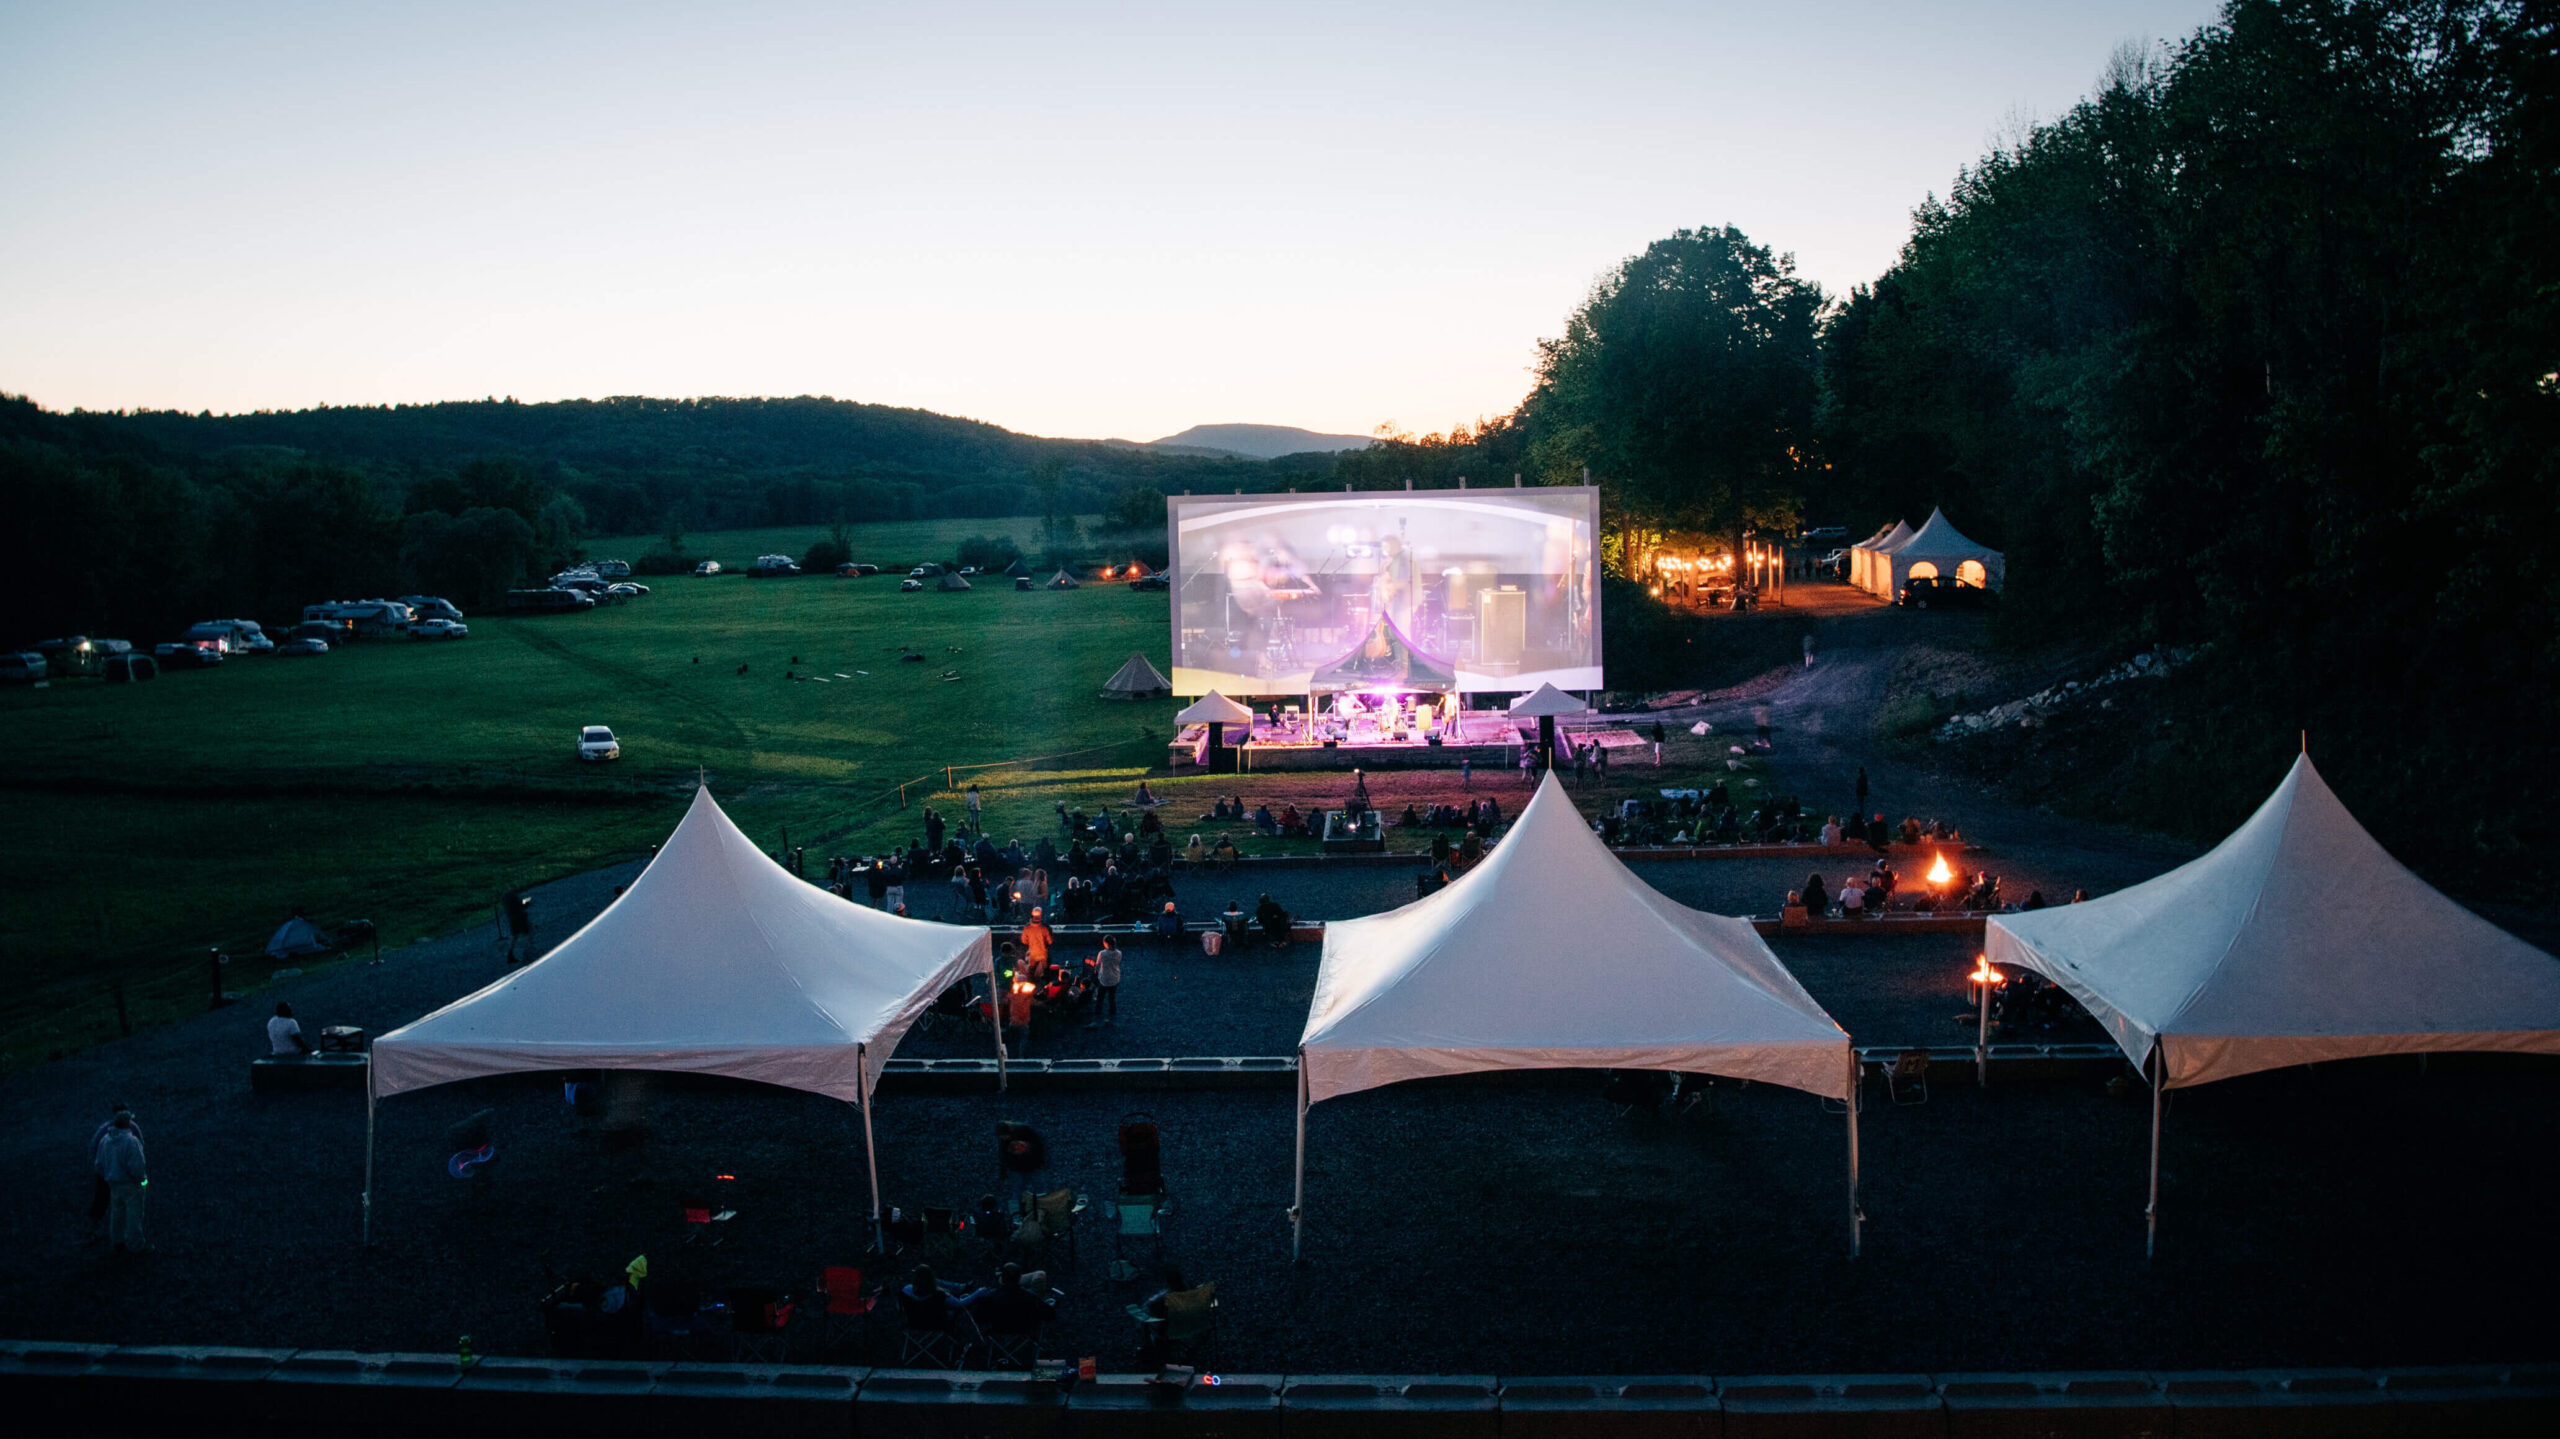 A large screen in the distance shows a musical performance during the Sandy River Music Festival in Farmington, Maine. Photography by Sharyn Peavey Photography